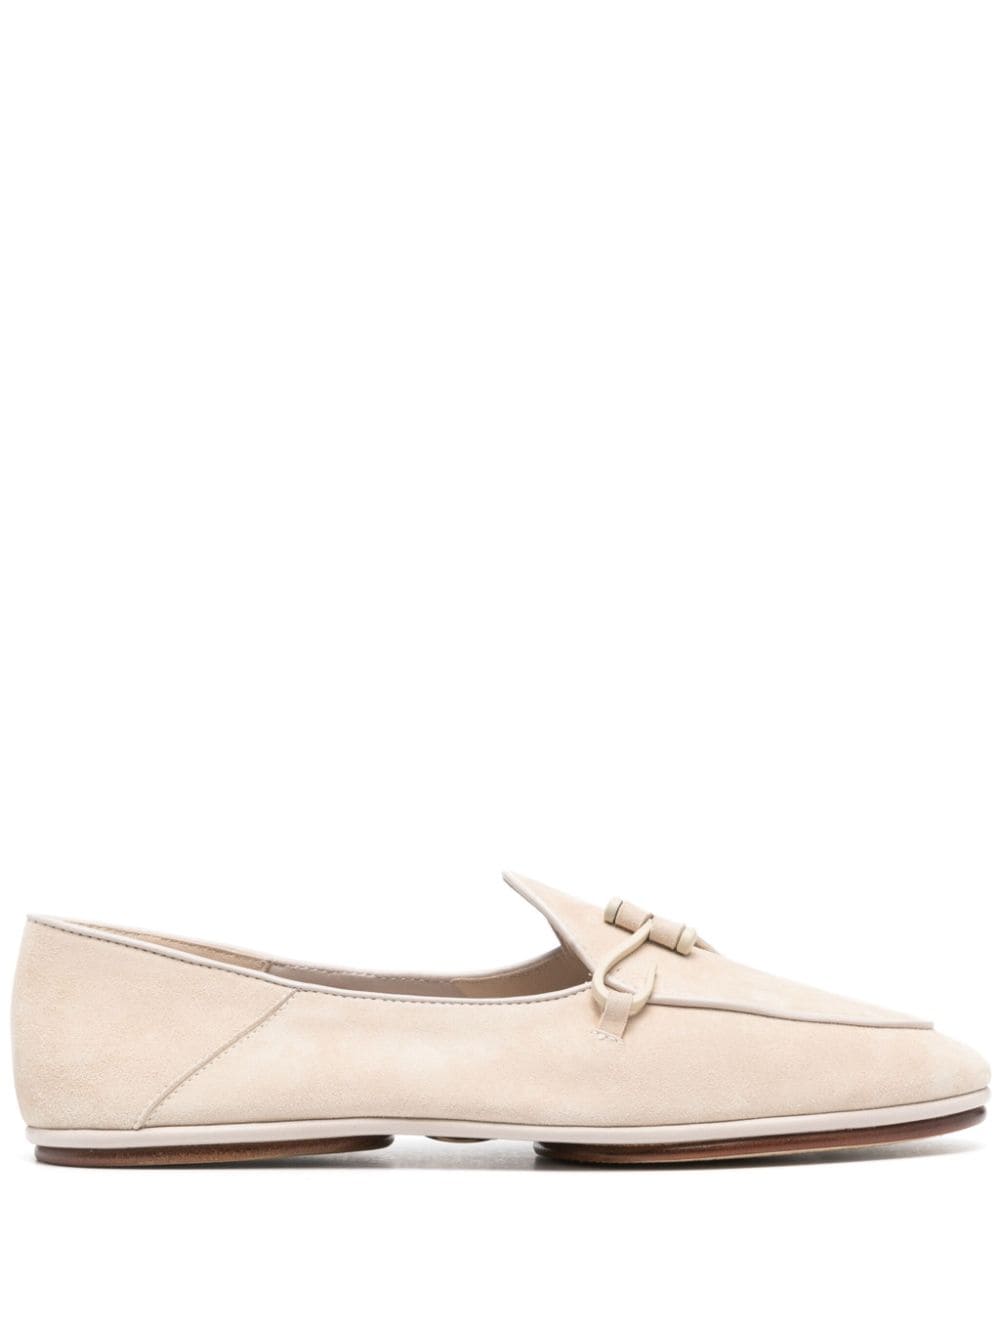 Shop Edhen Milano Comporta Fly Suede Loafers In Nude